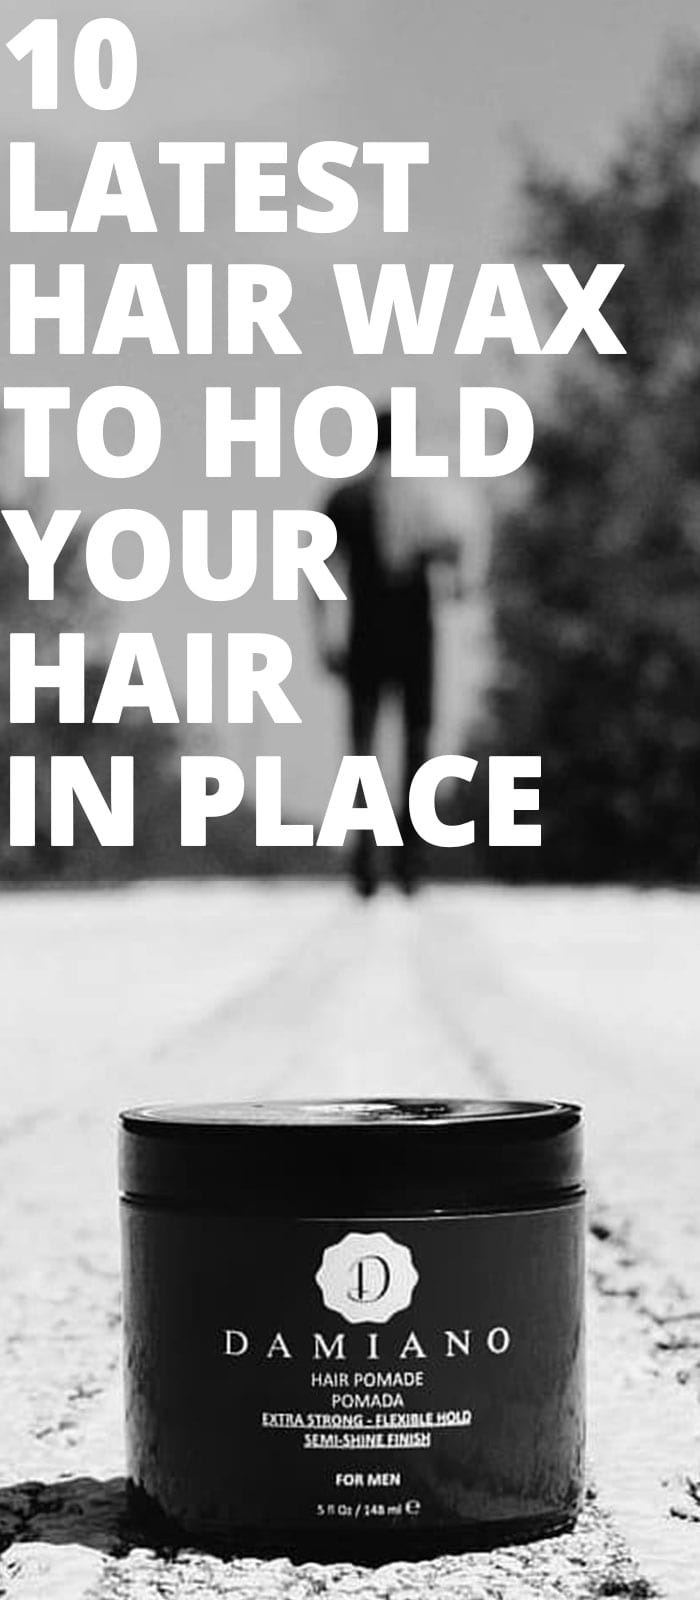 LATEST-HAIR-WAX-TO-HOLD-YOUR-HAIR-IN-PLACE